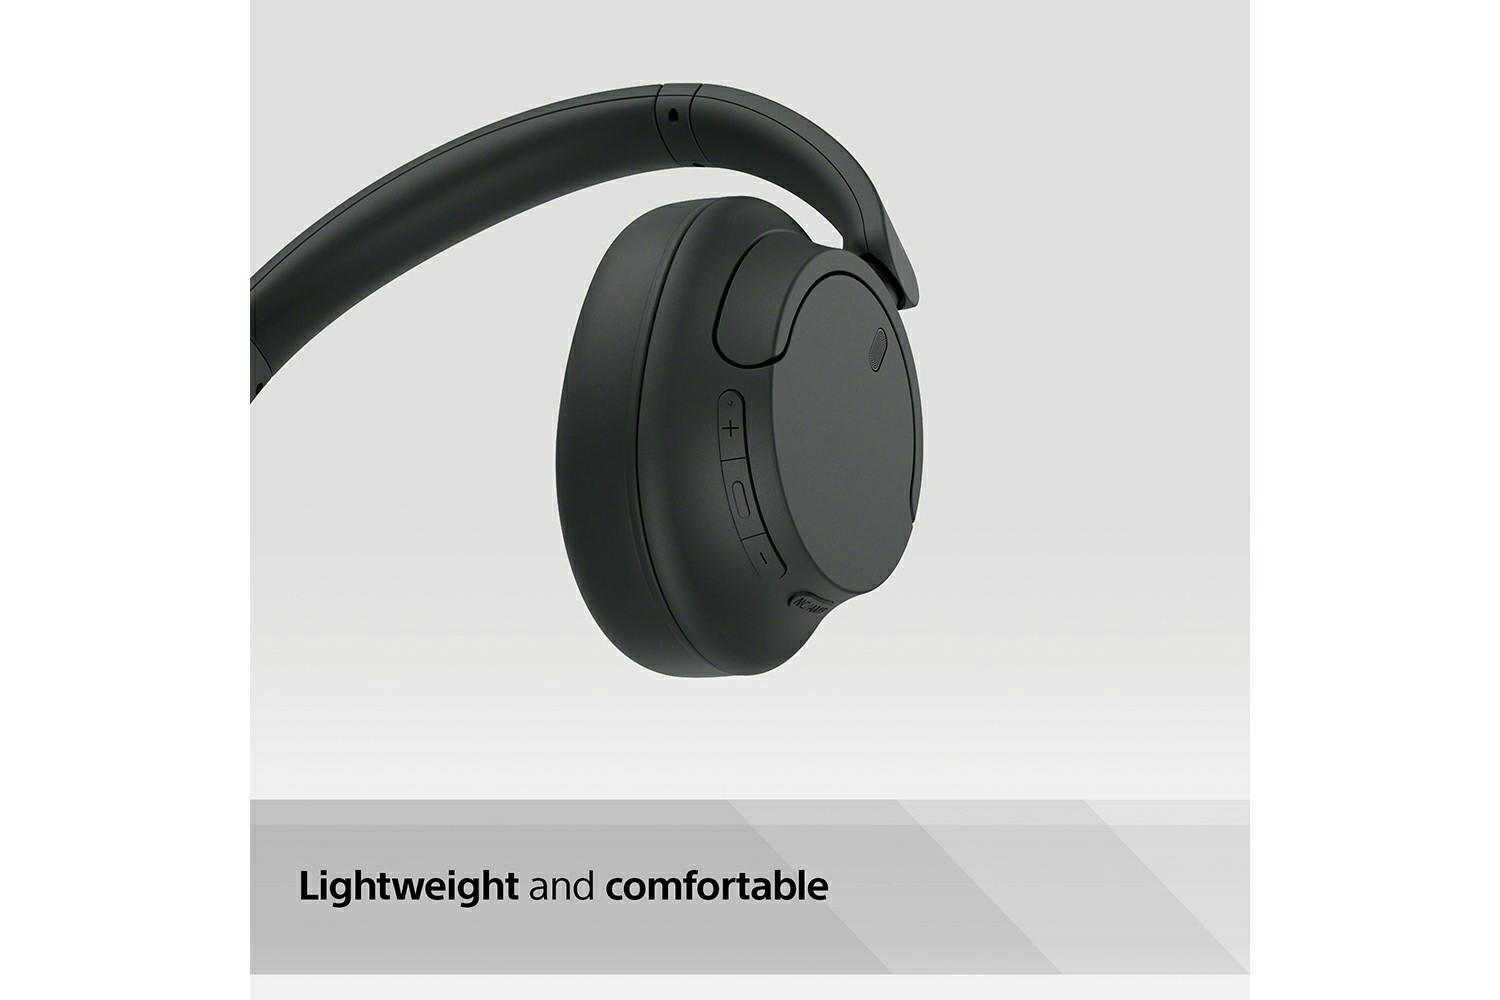 SONY WH-CH720N Wireless Noise Canceling Headphones Black White